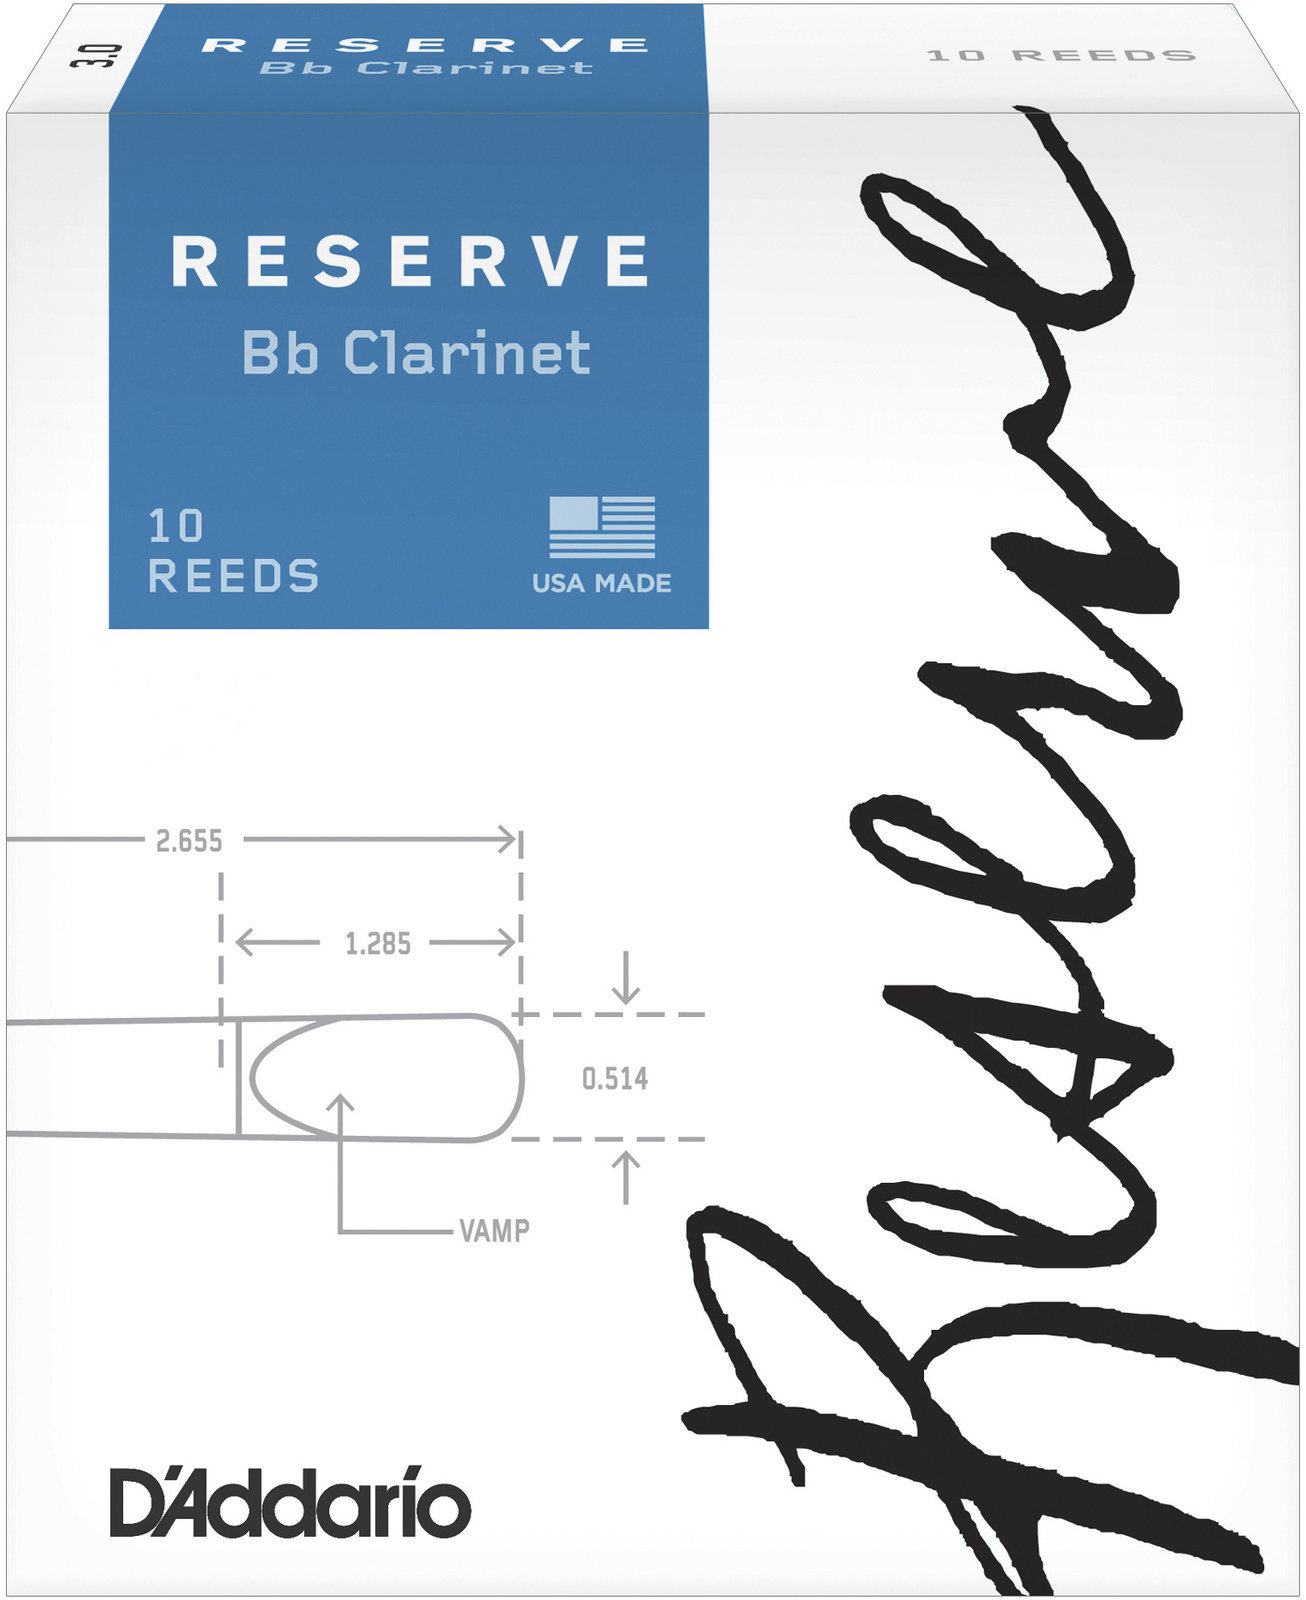 Clarinet Reed D'Addario-Woodwinds Reserve 3.5 Clarinet Reed